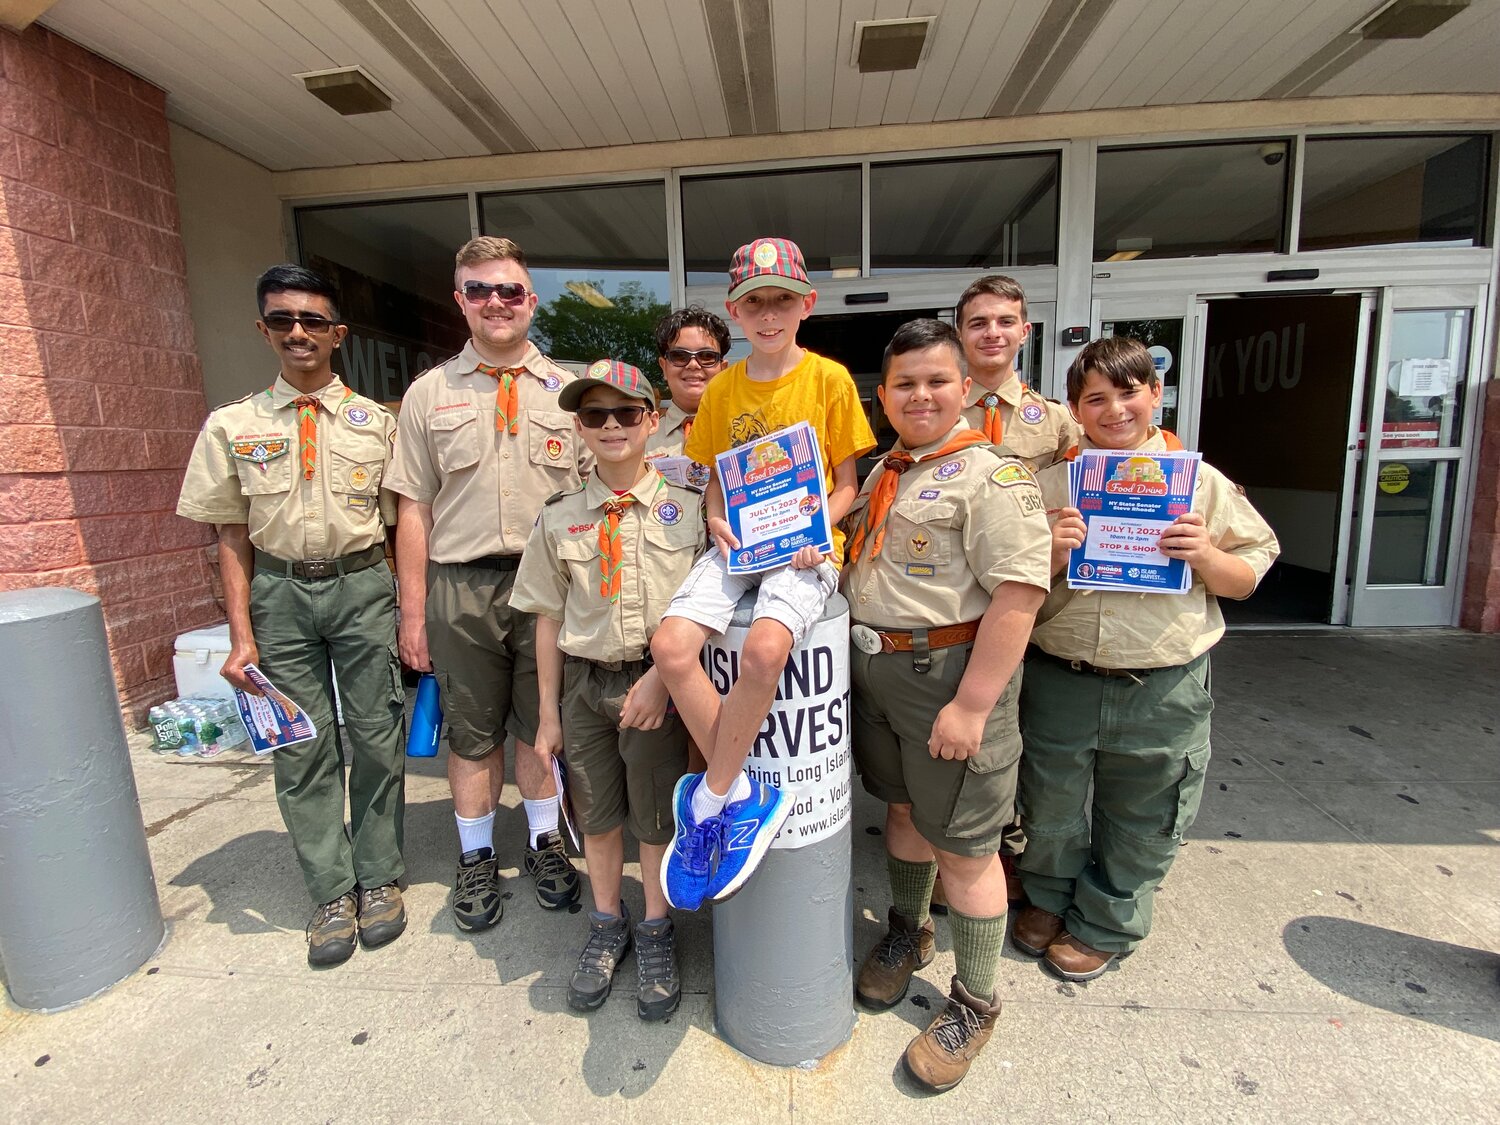 Boy Scout Troop 362 from East Meadow came out to help the Freedom Food Drive, a collaboration between Senator Steve Rhoads and Island Harvest.